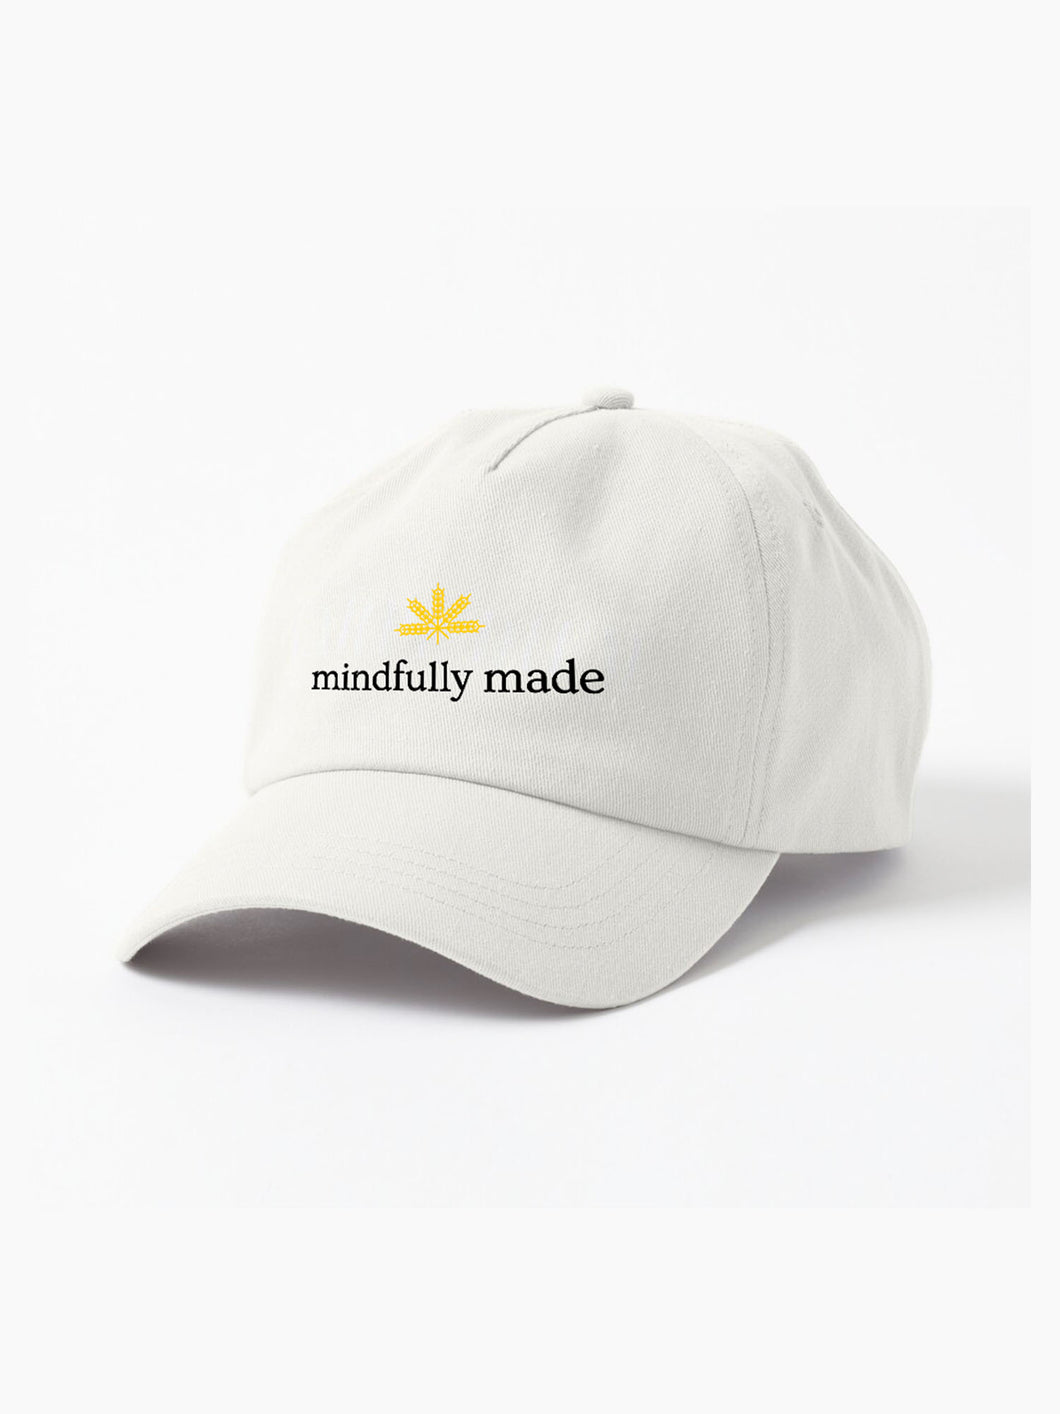 Pantry Logo Hat in white with a 